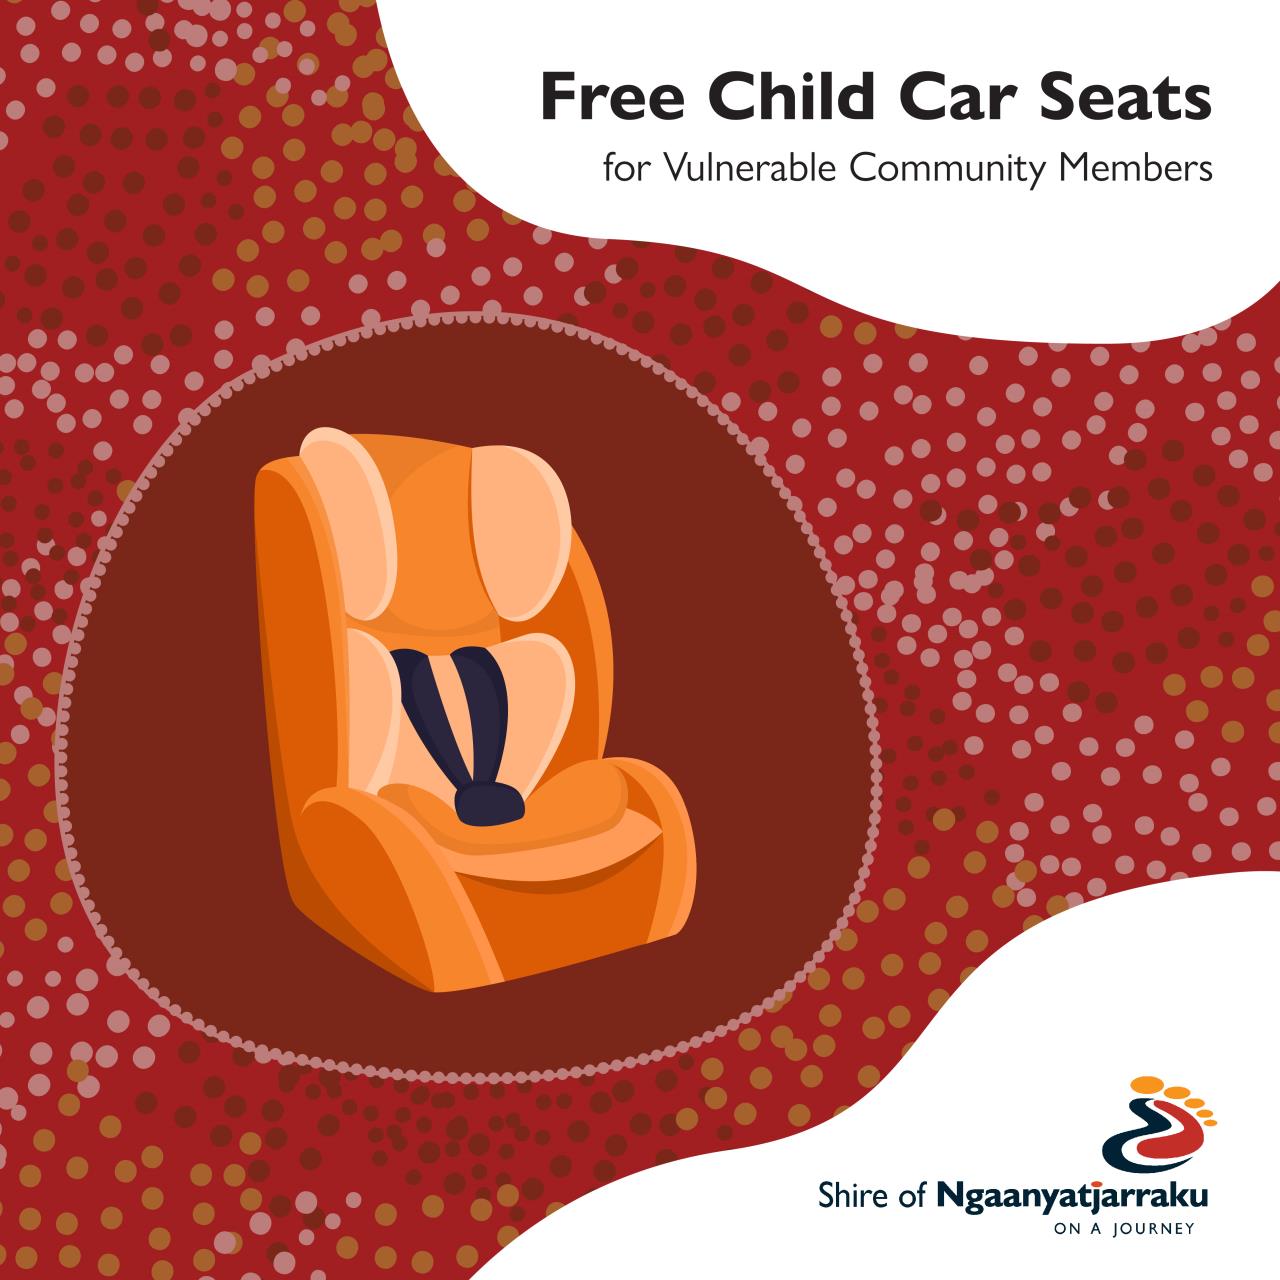 Free Child Car Seats for Vulnerable Community Members